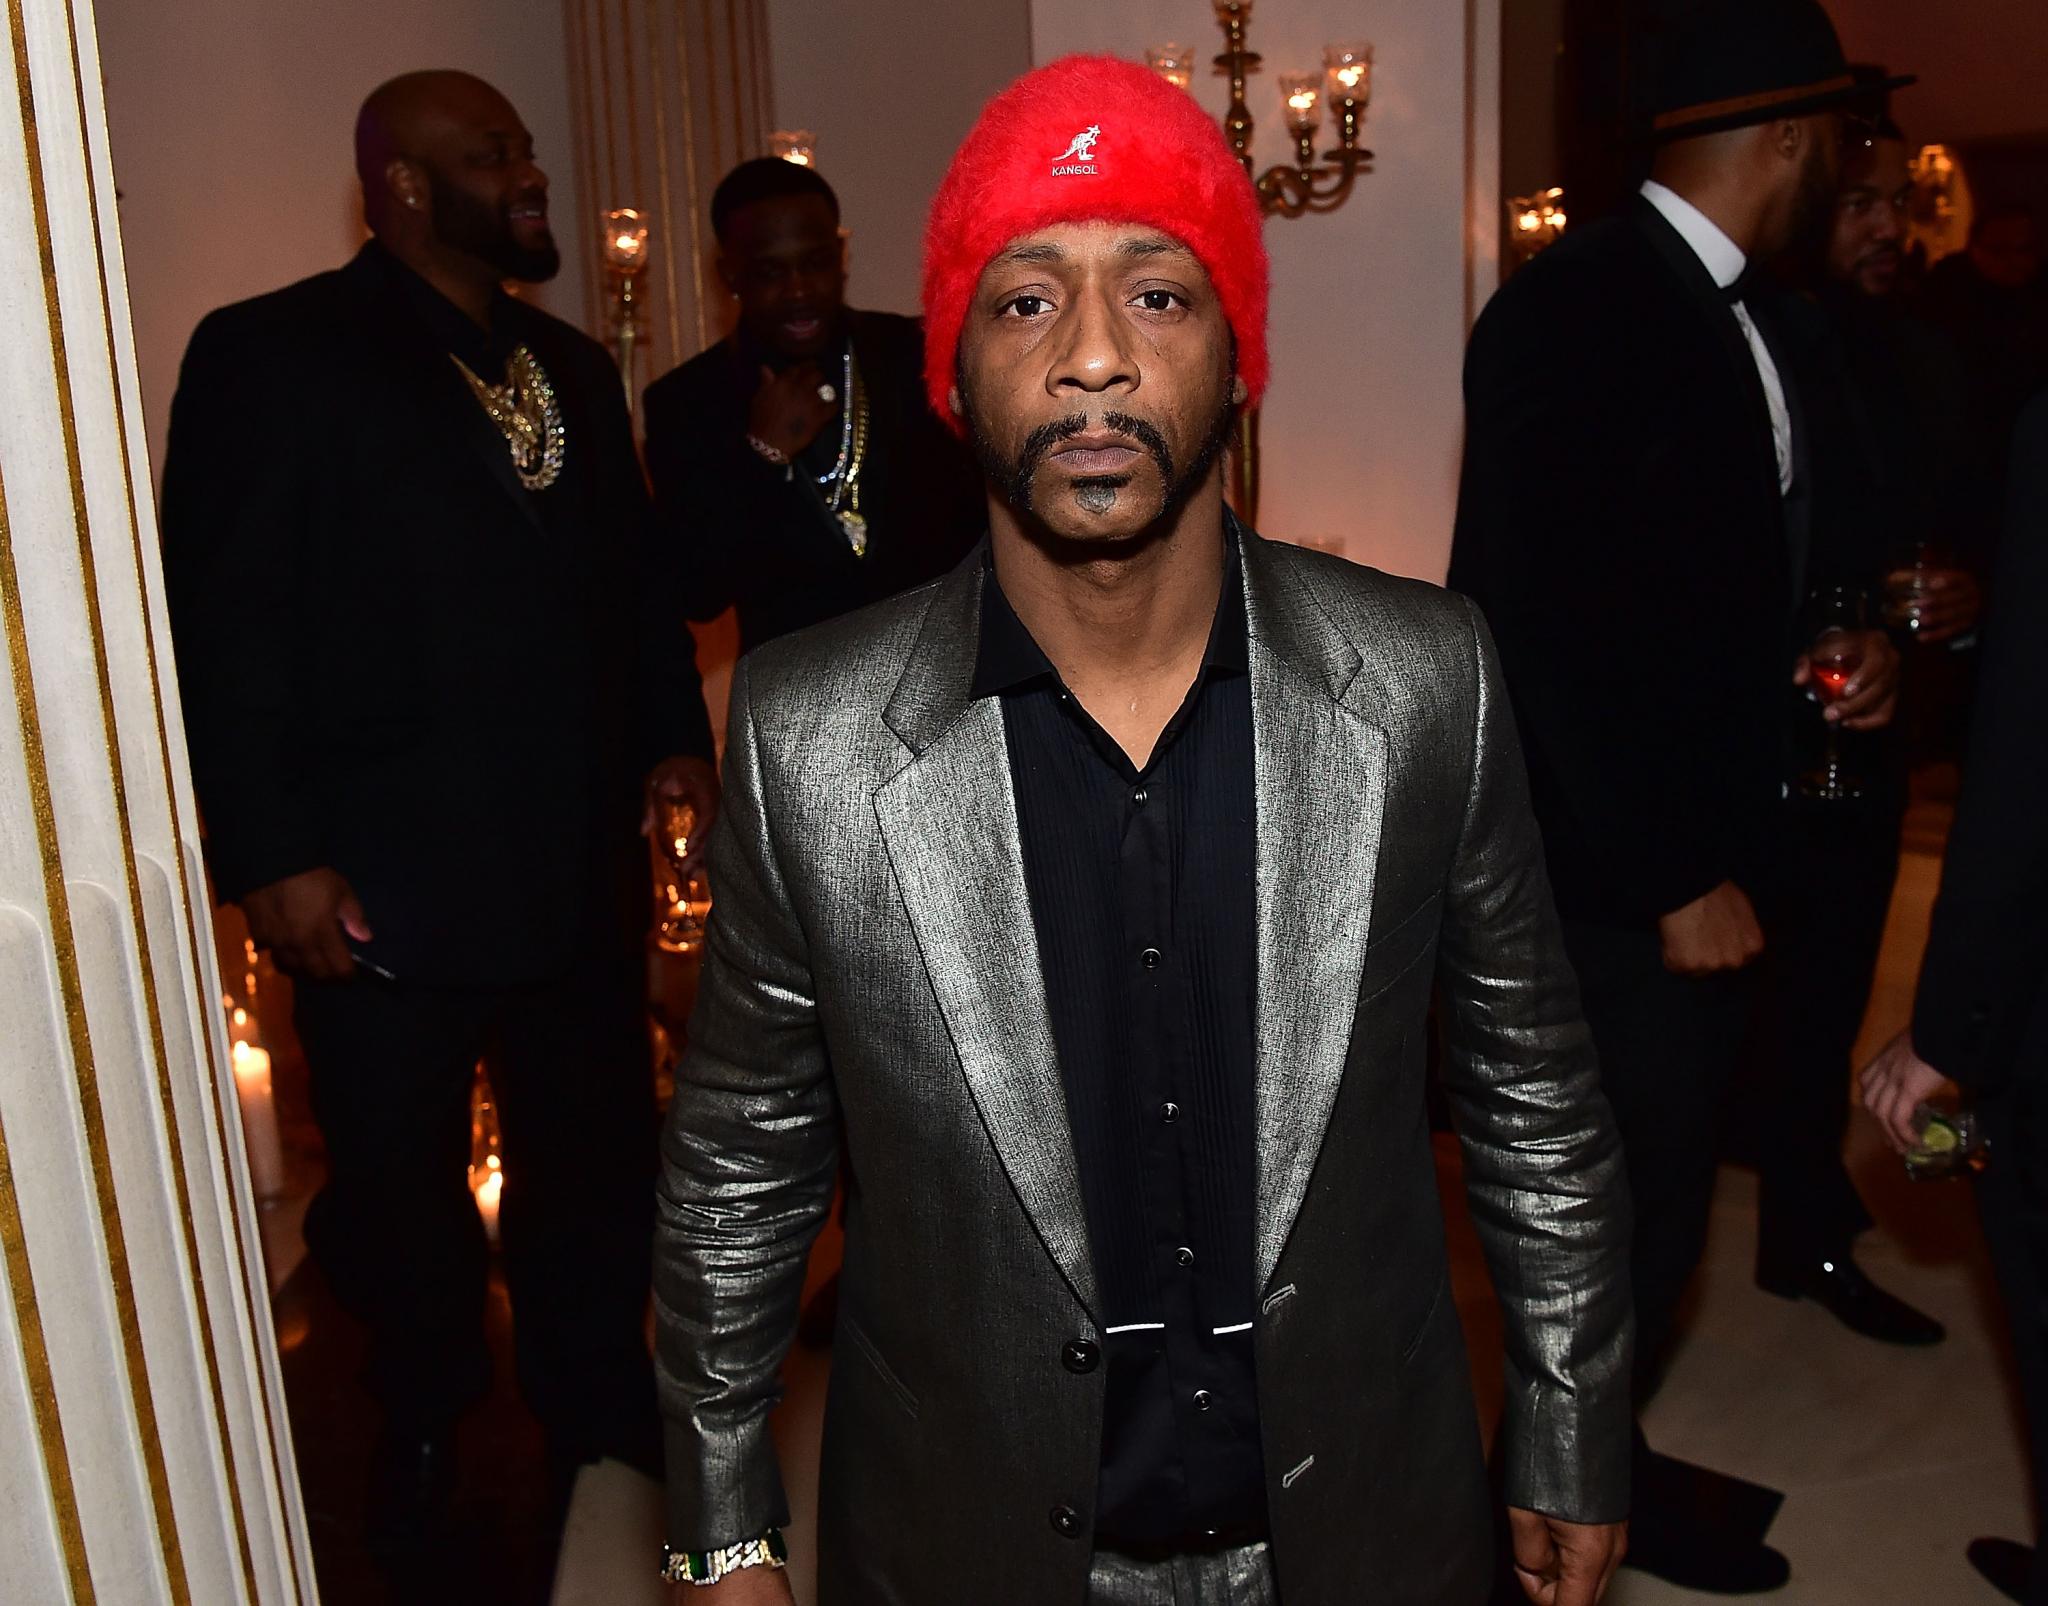 Katt Williams Shares His Side of the Teen Fight Story